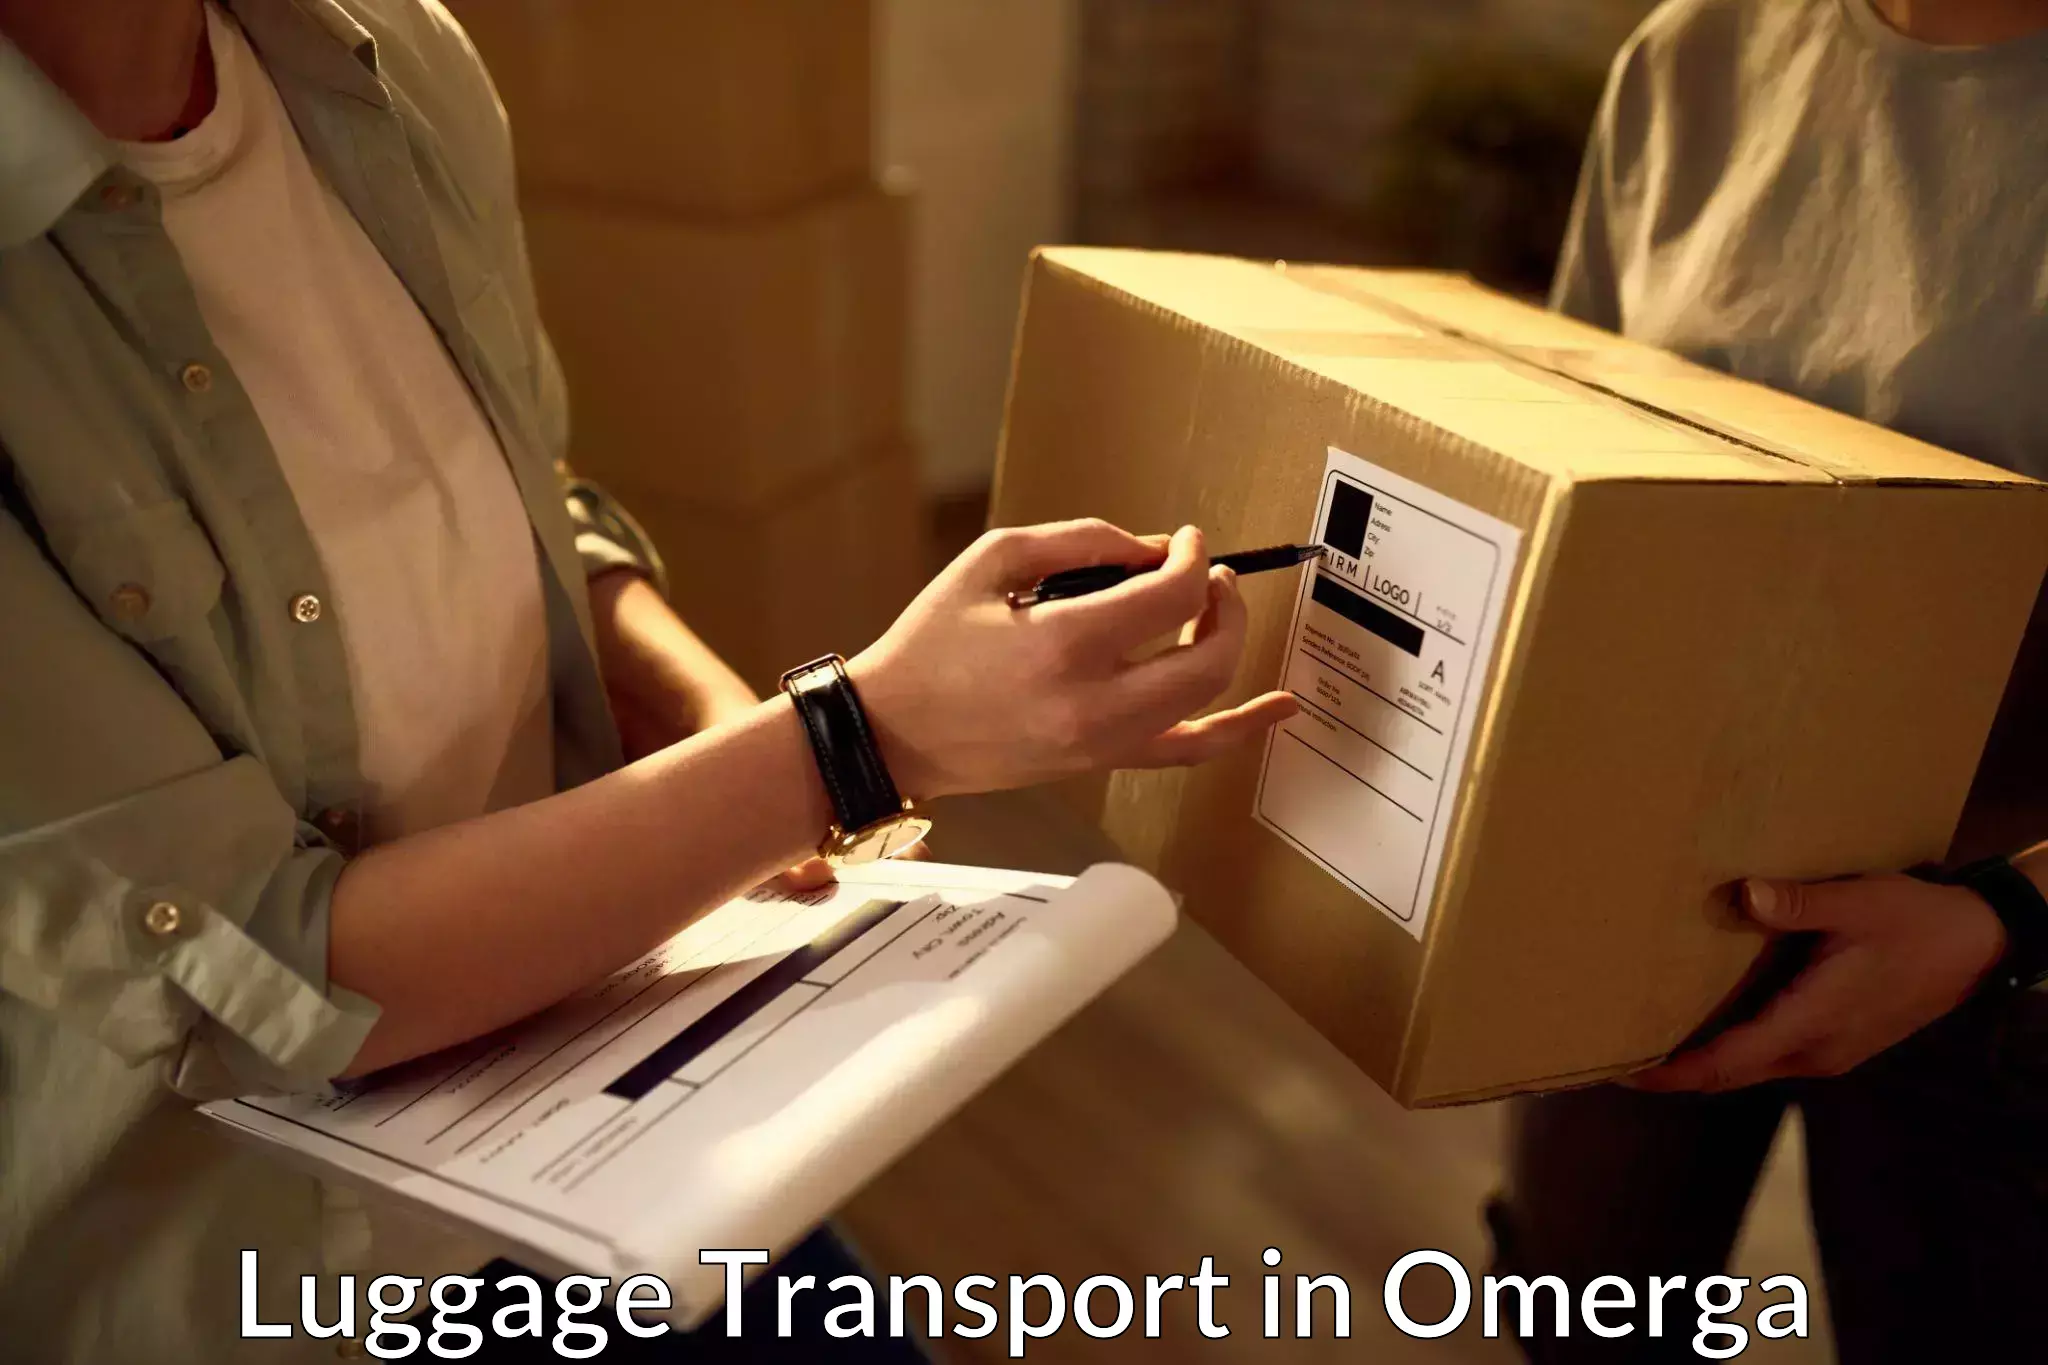 Luggage delivery news in Omerga